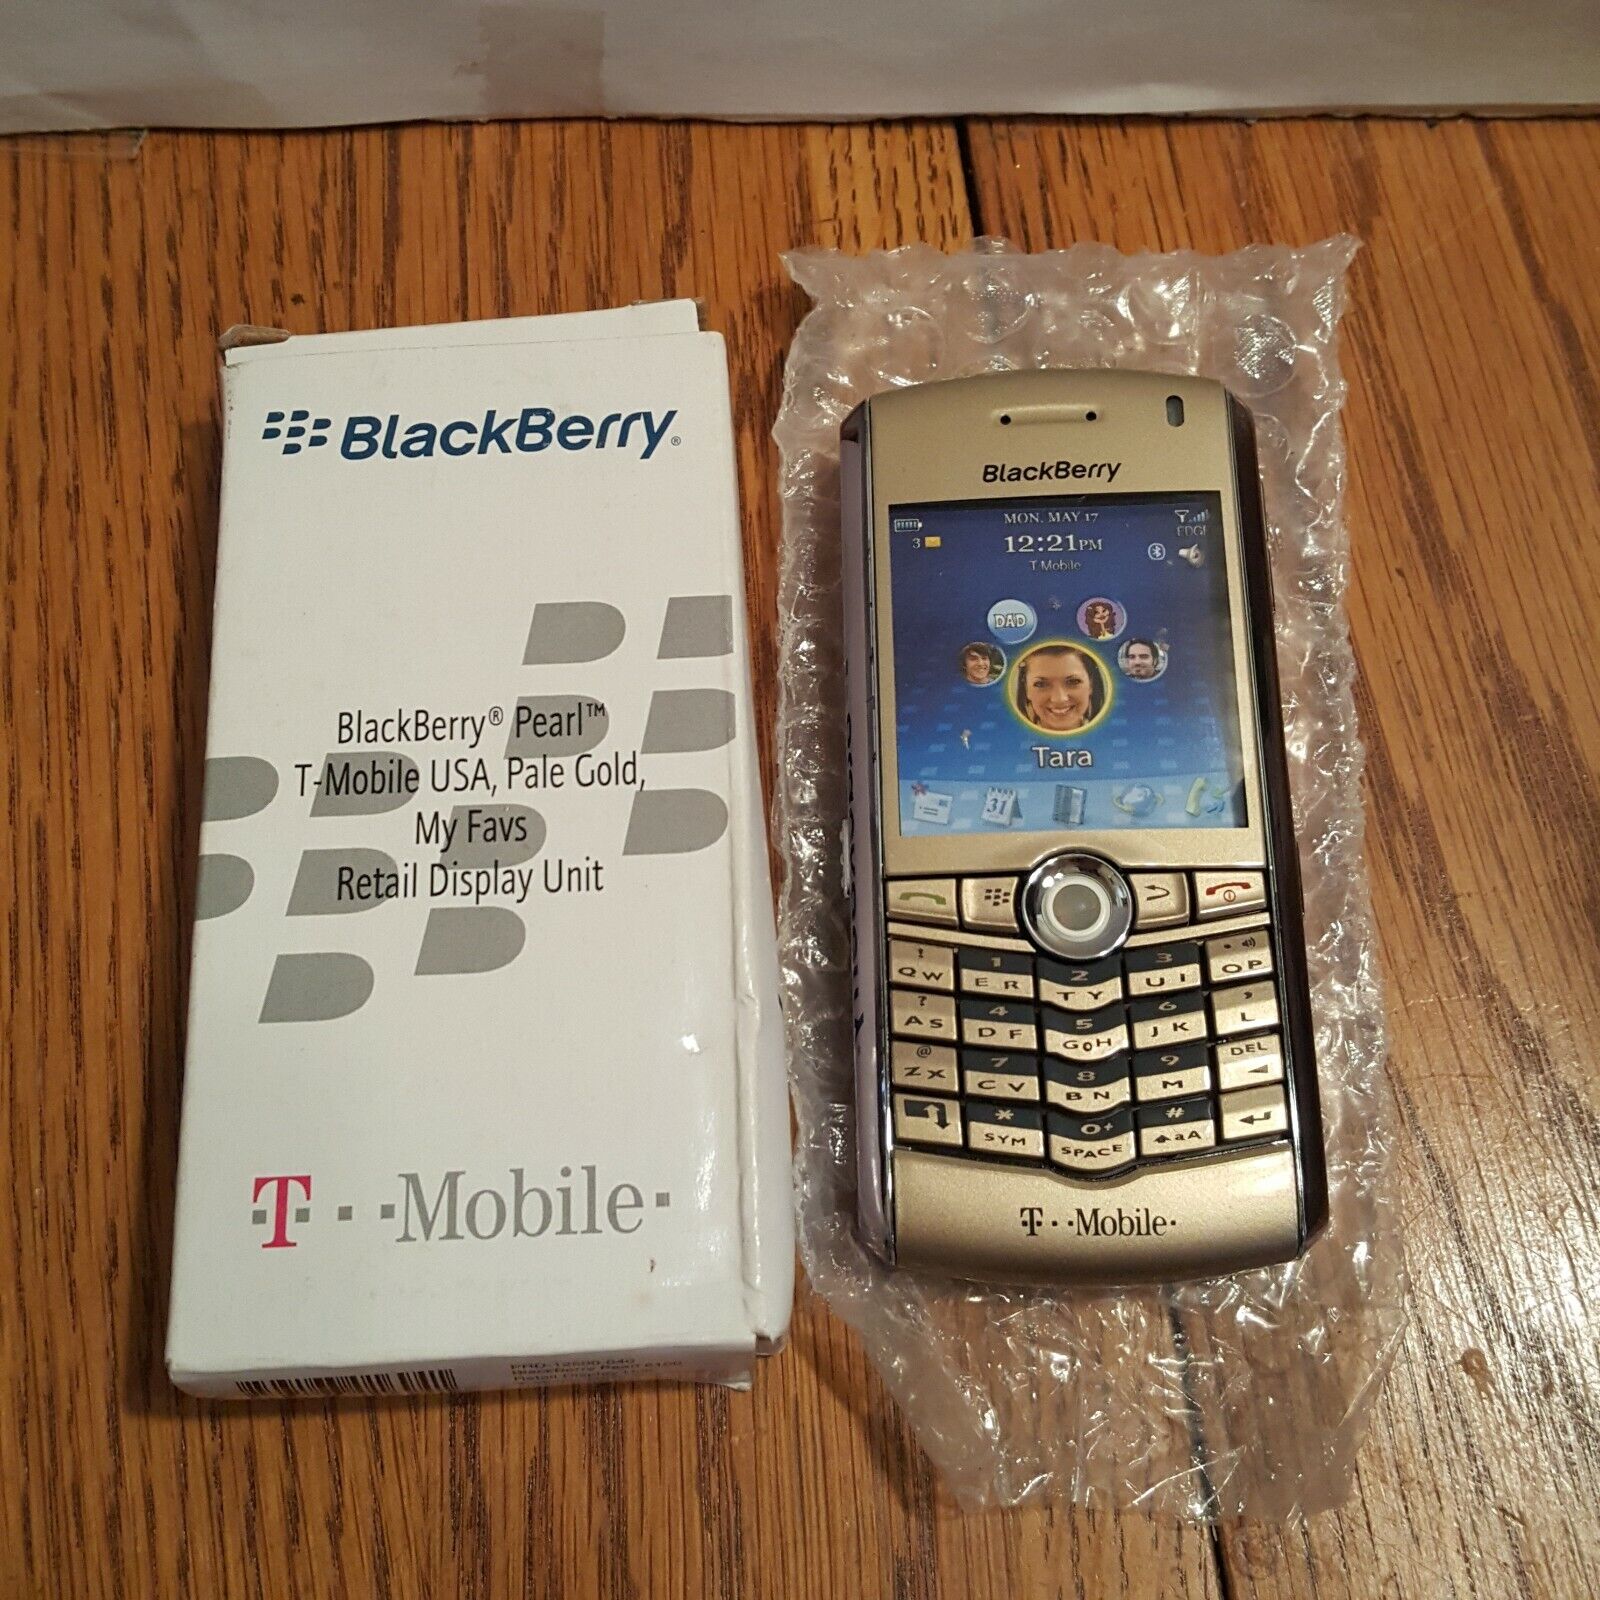 BlackBerry Pearl 8100 Retail Display Unit - Pale Gold - Fake play movie Prop D3